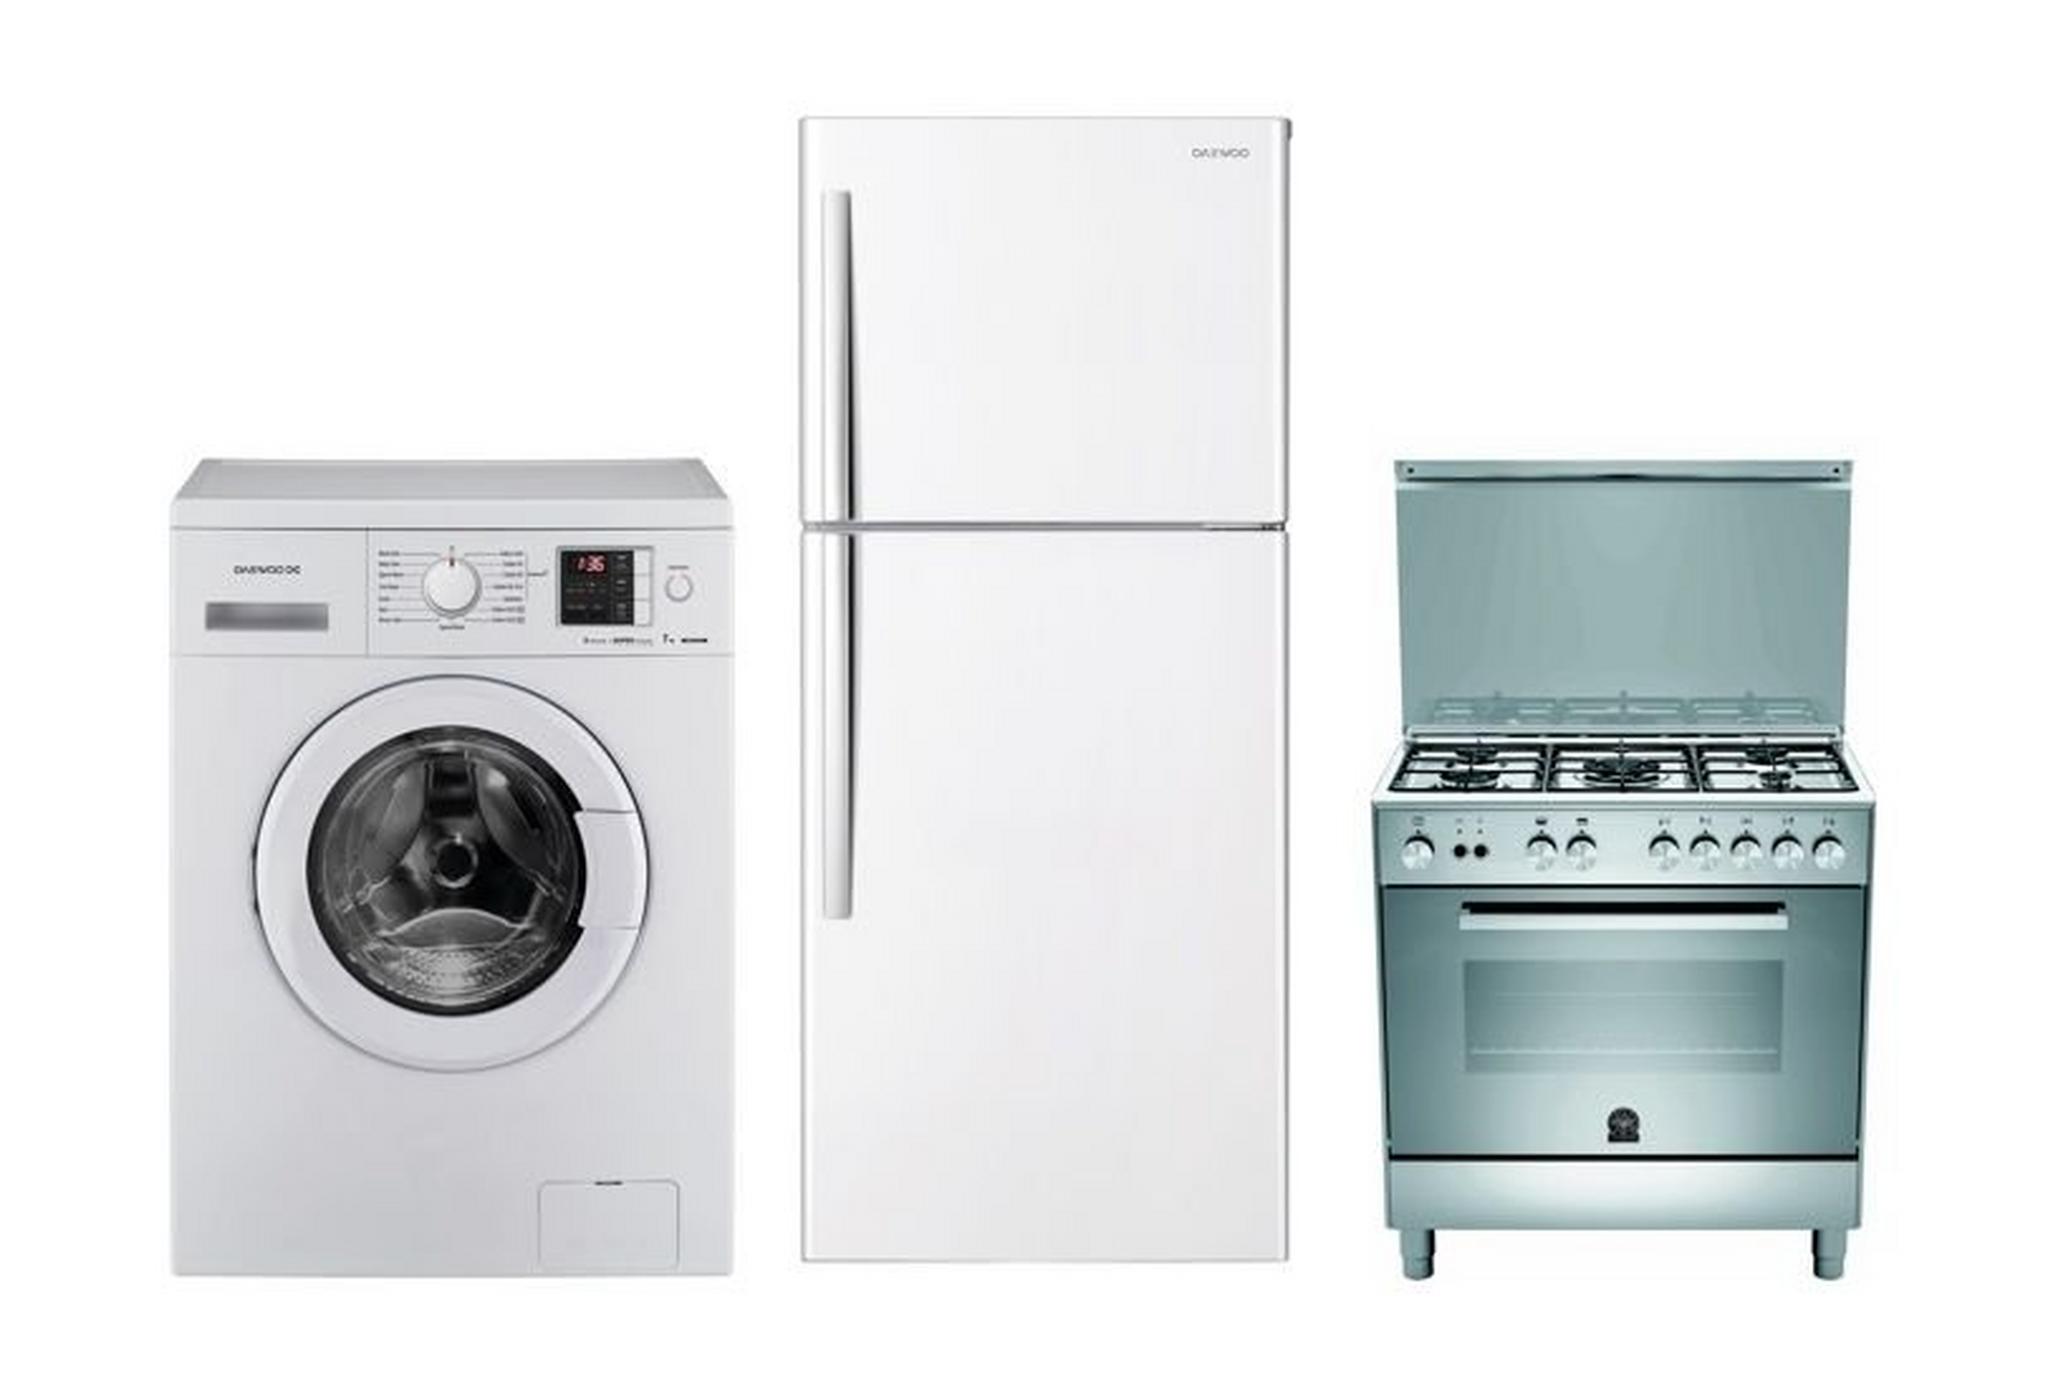 Daewoo Front Loading Washer 7kg + Daewoo 16 Cft. Top Mount Refrigerator + Lagermania 80 x 50 Gas Cooker